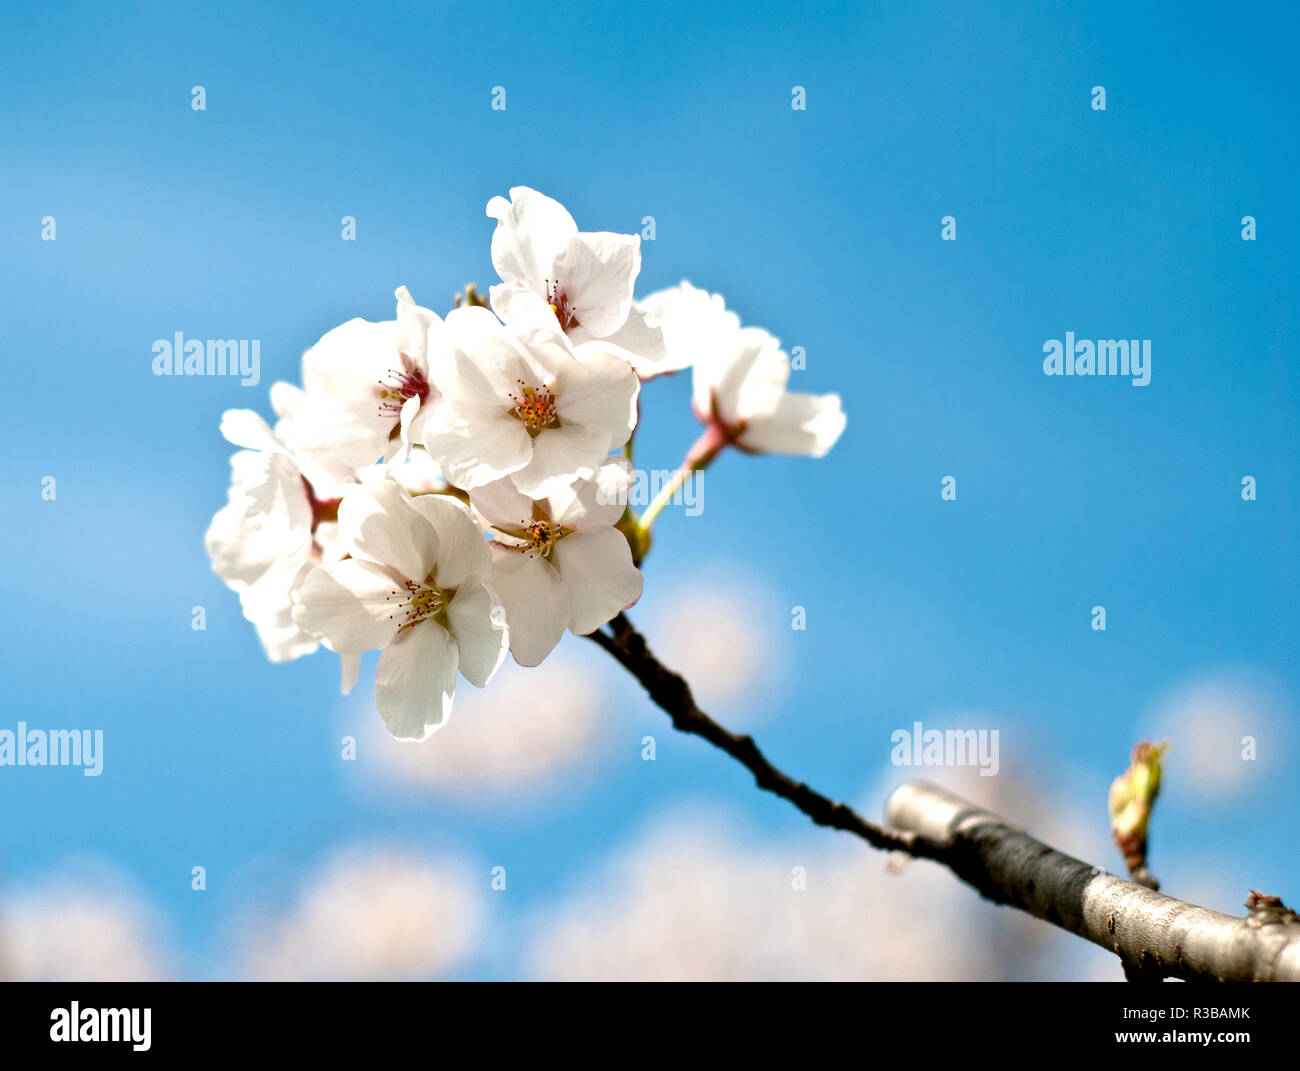 Bloomed branch with cherry flowers, blue sky and sun Stock Photo